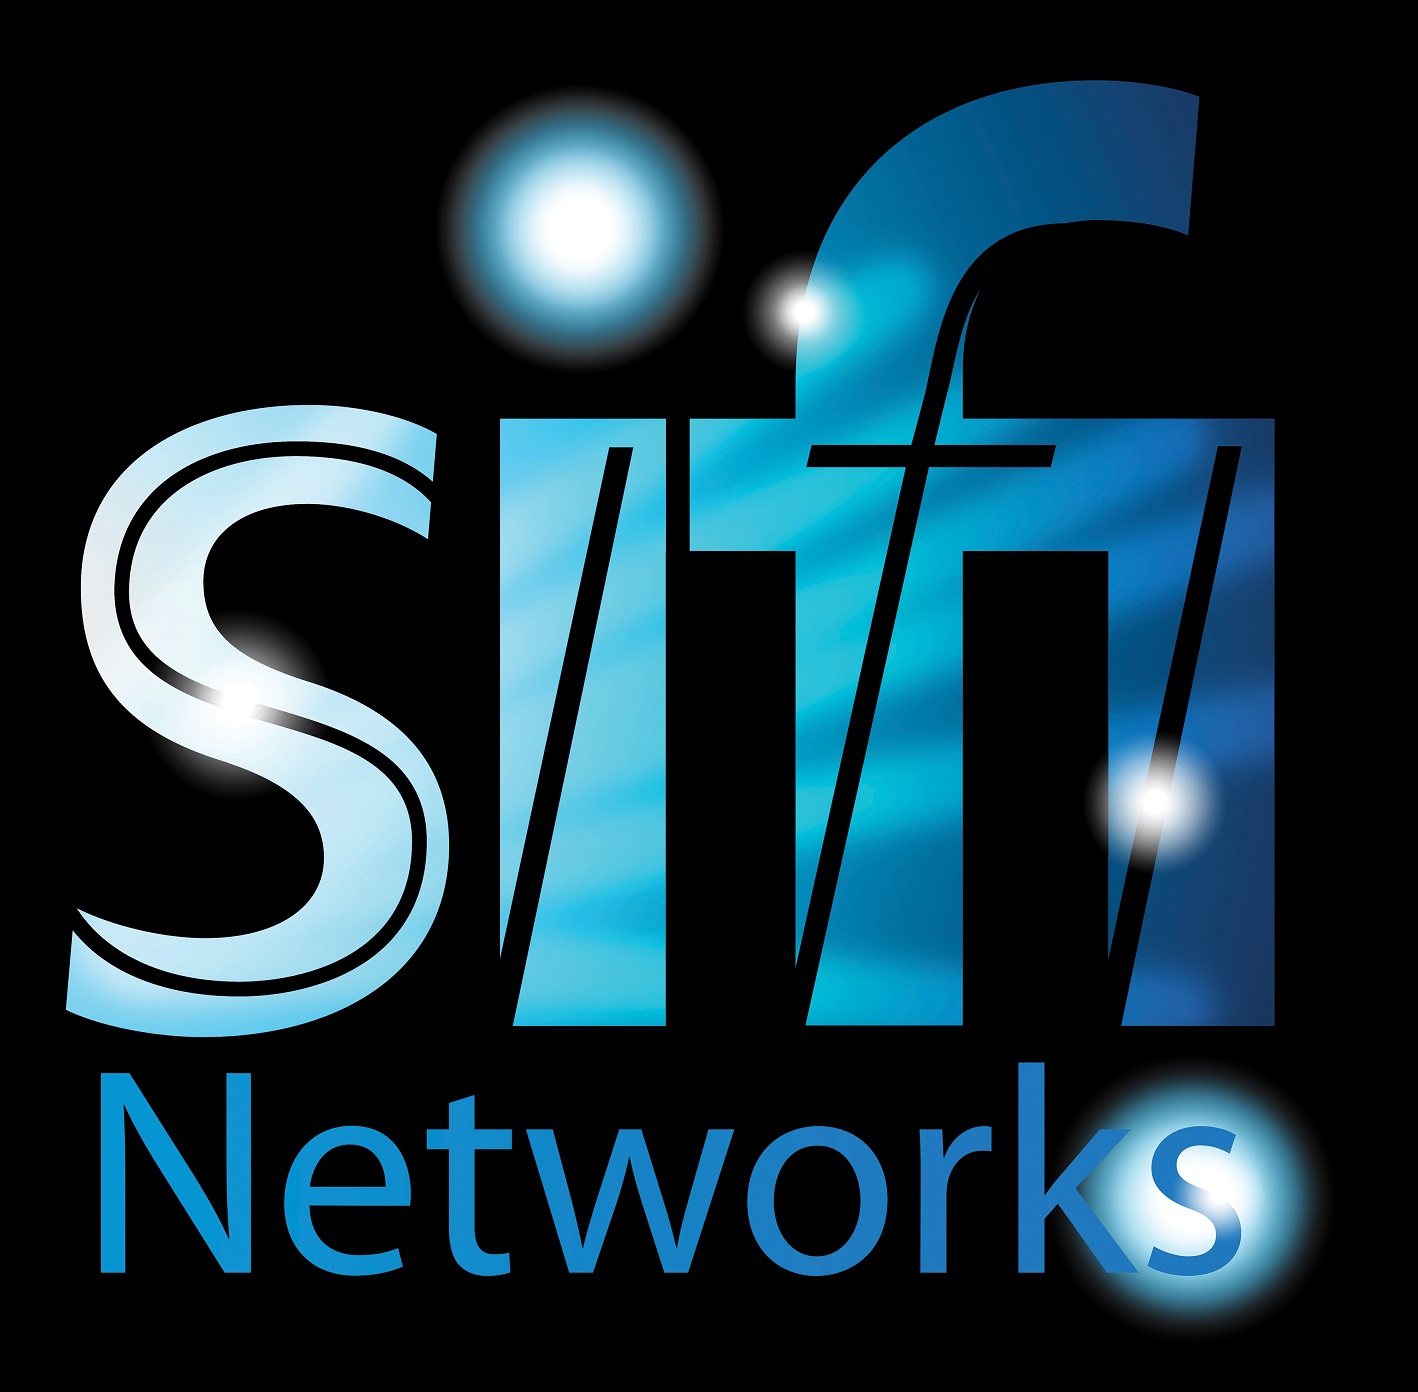 SiFi Networks, Wednesday, May 20, 2020, Press release picture